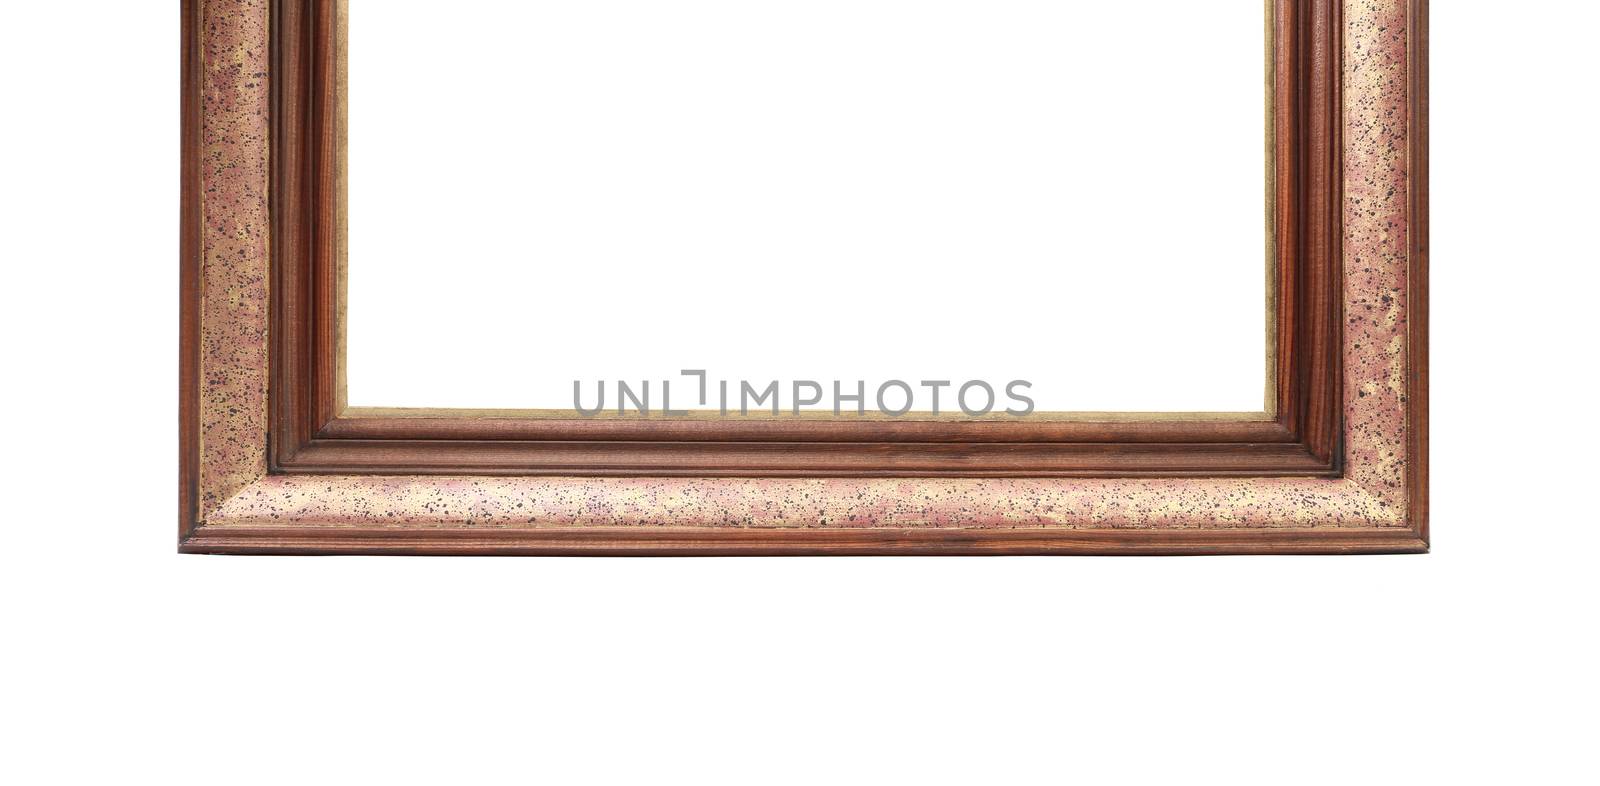 Old wooden frame. Isolated on a white background.